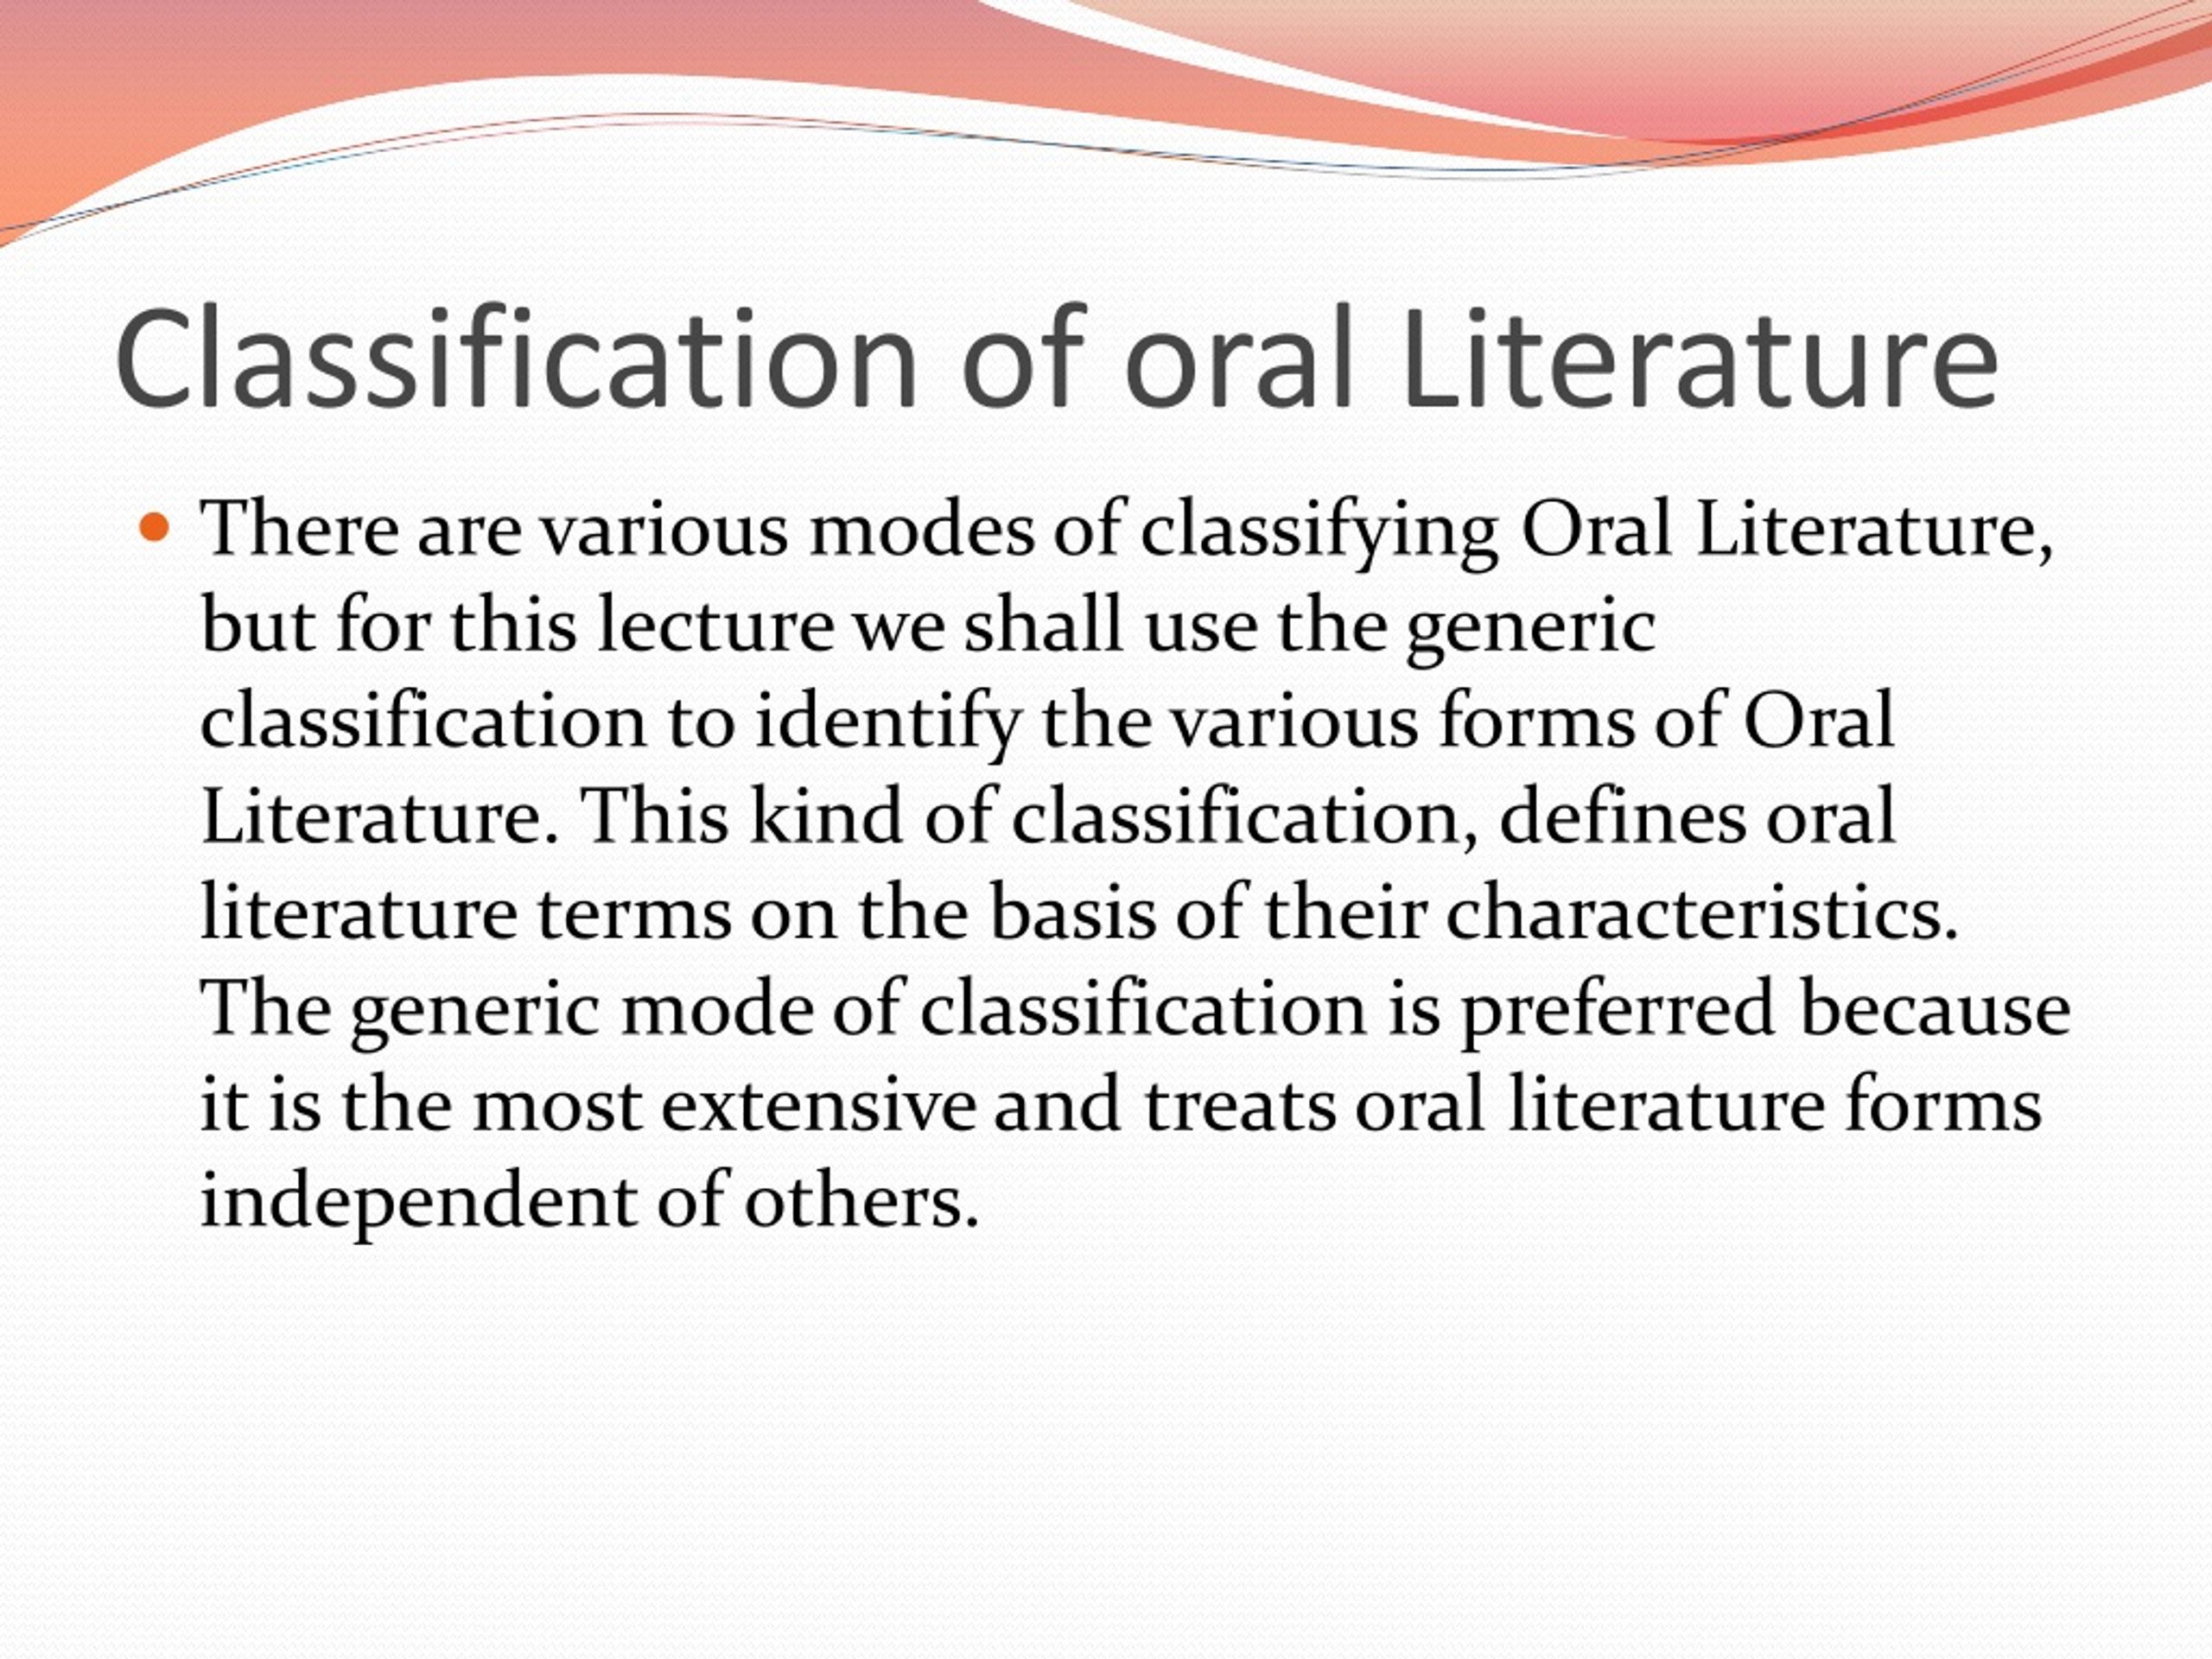 what are the categories of oral literature